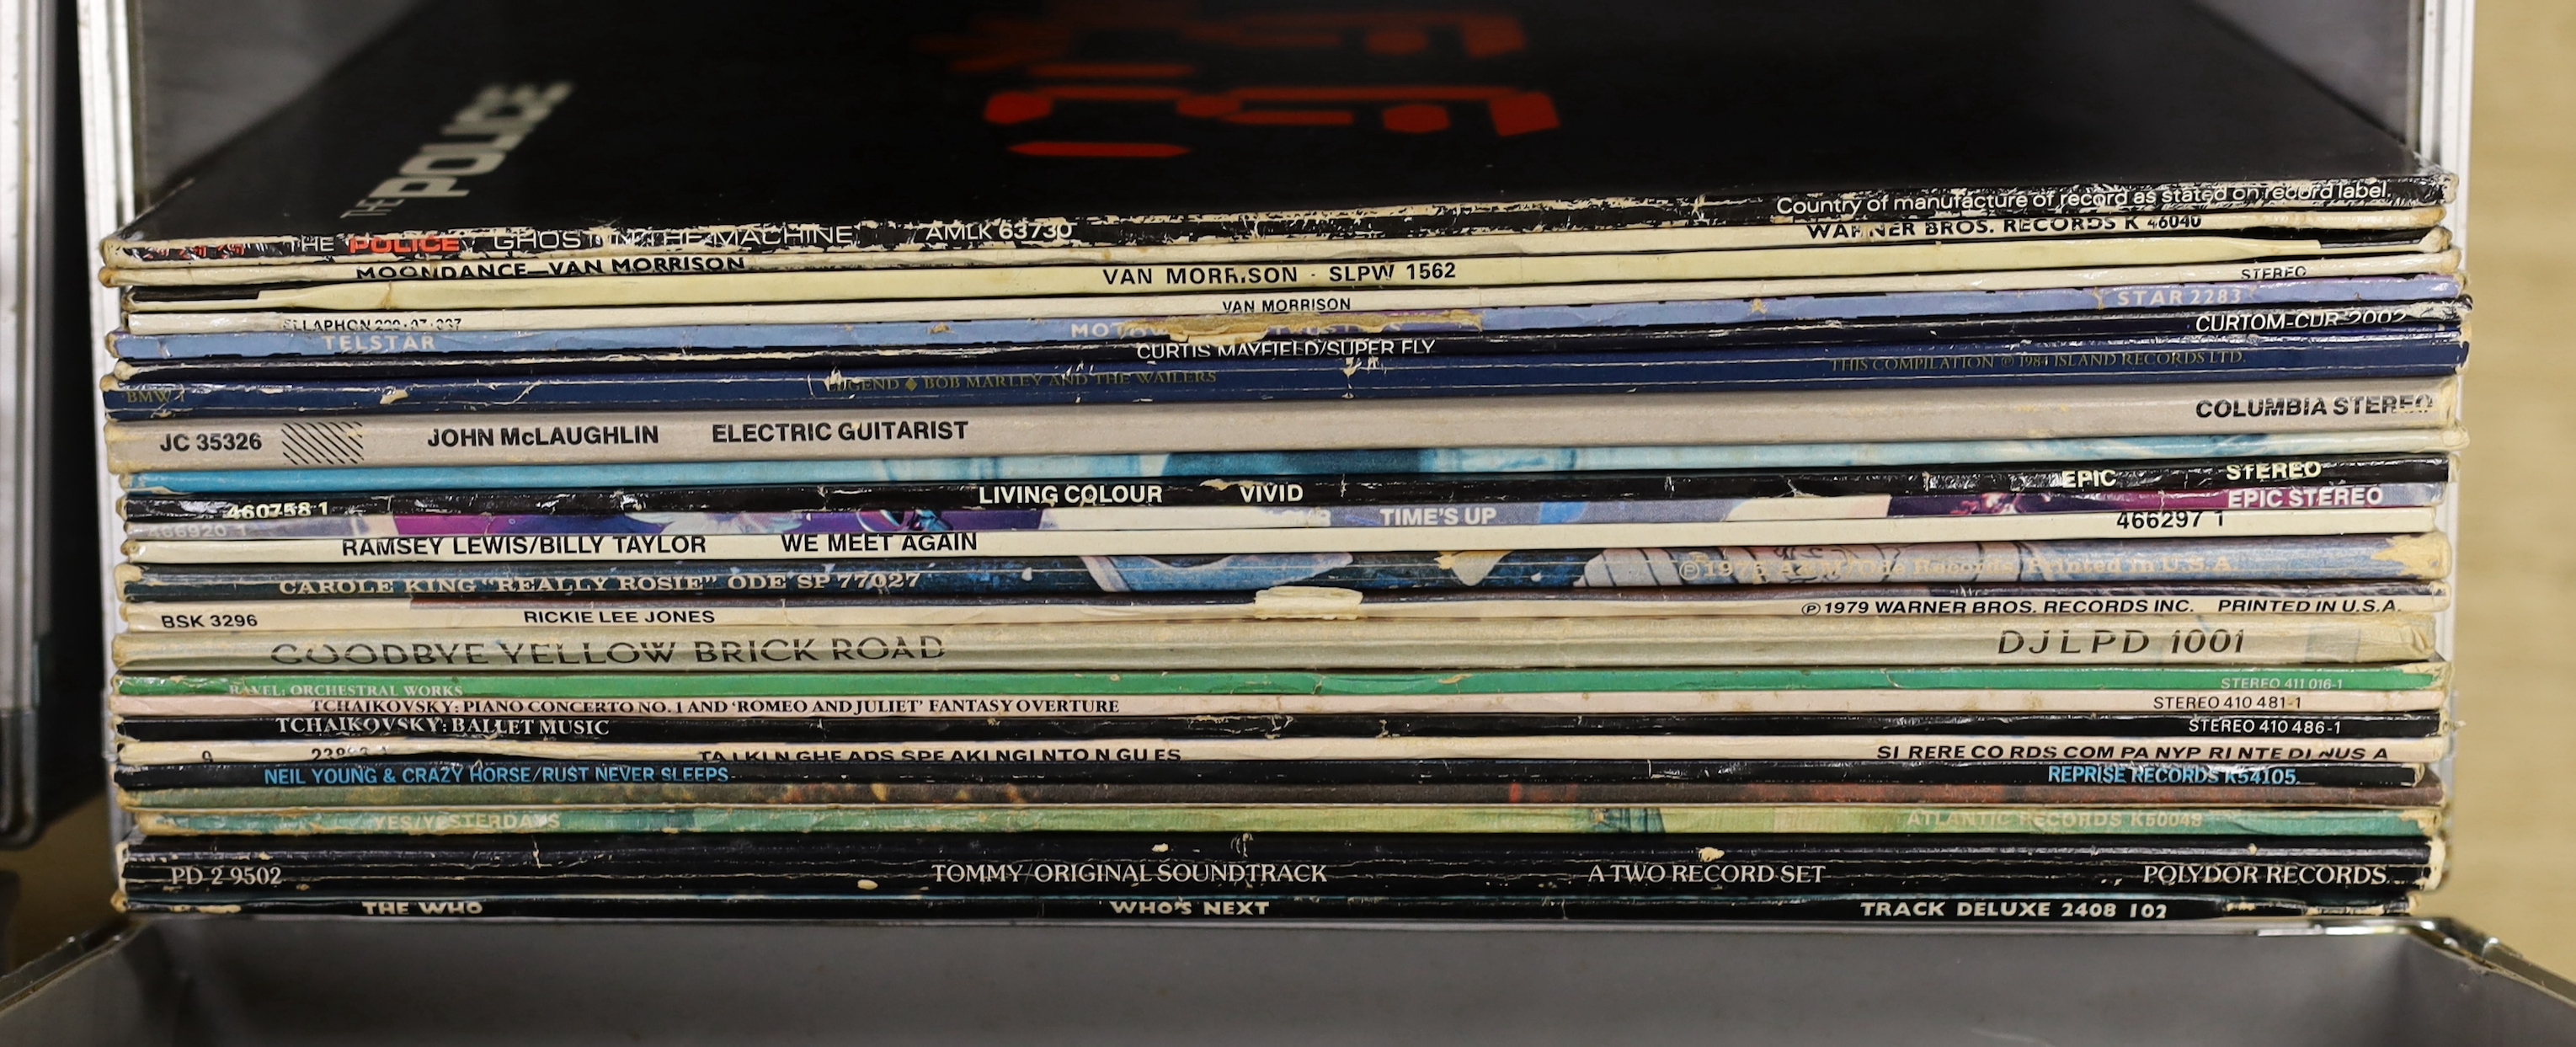 Forty-eight mainly 1970's-80's LPs contained within two LP flight cases, including The Police, Van Morrison, Rickie Lee Jones, Elton John, Neil Young, The Who, The Velvet Underground, Bruce Springsteen, Iggy Pop, etc.